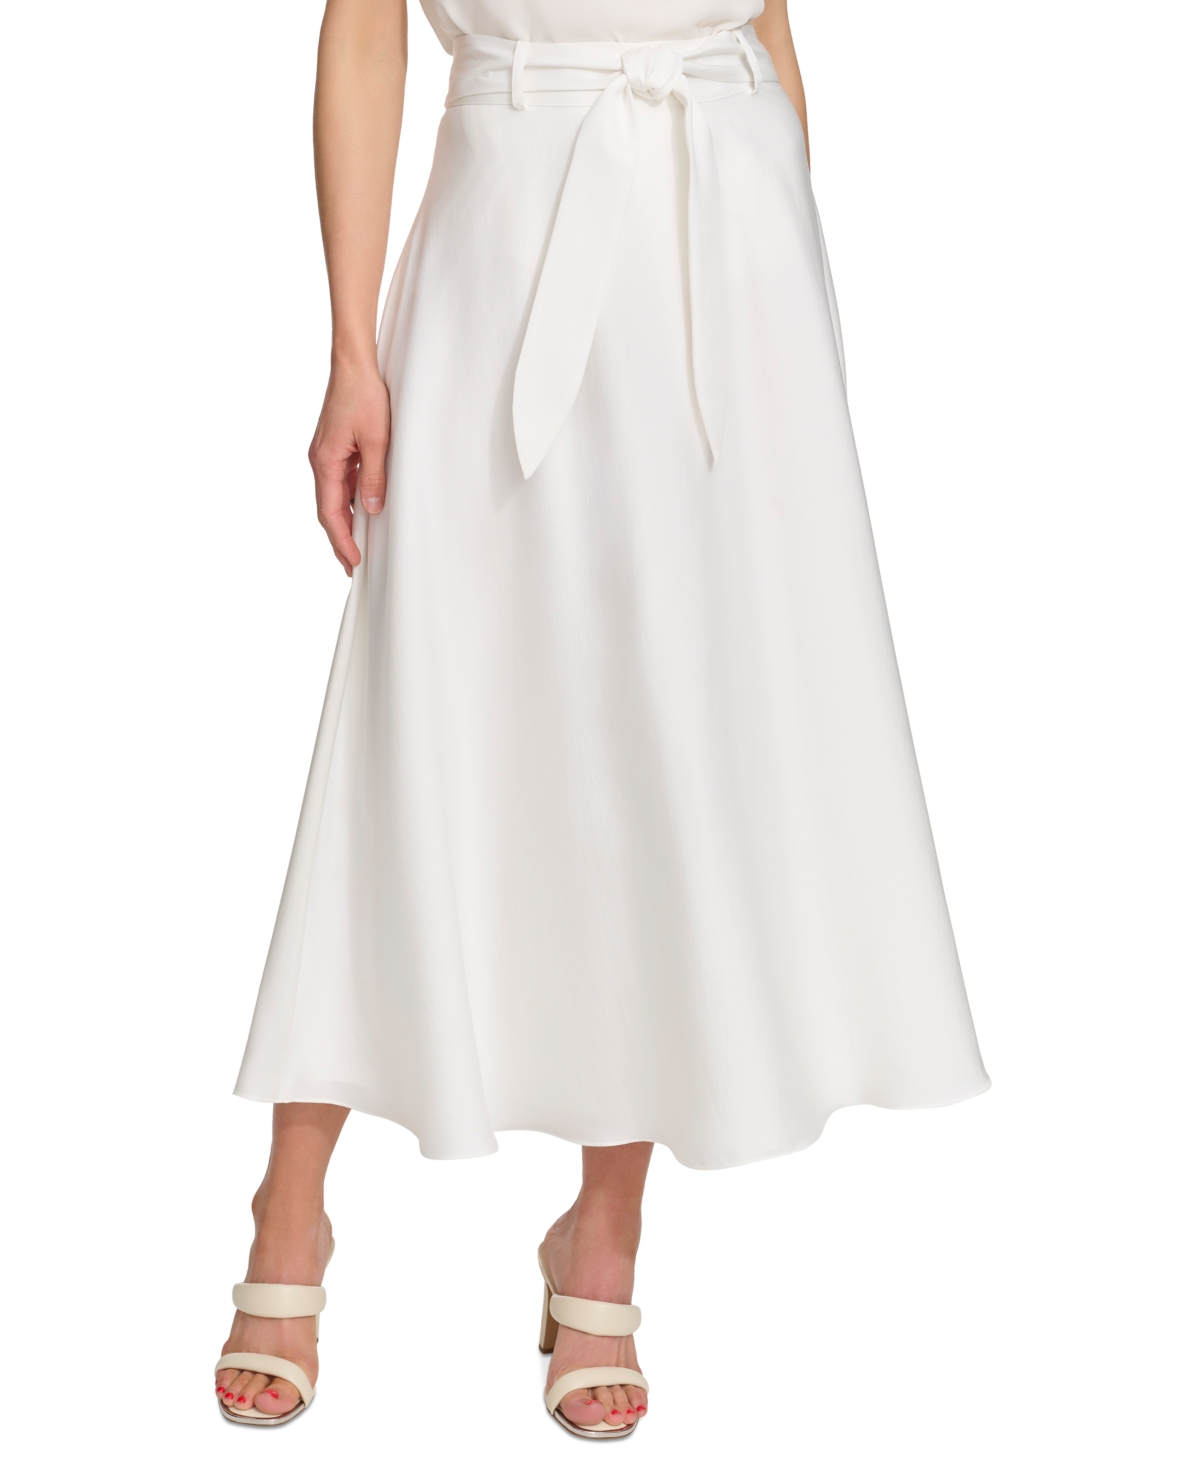 Women's Belted A-Line Midi Skirt - Ivory